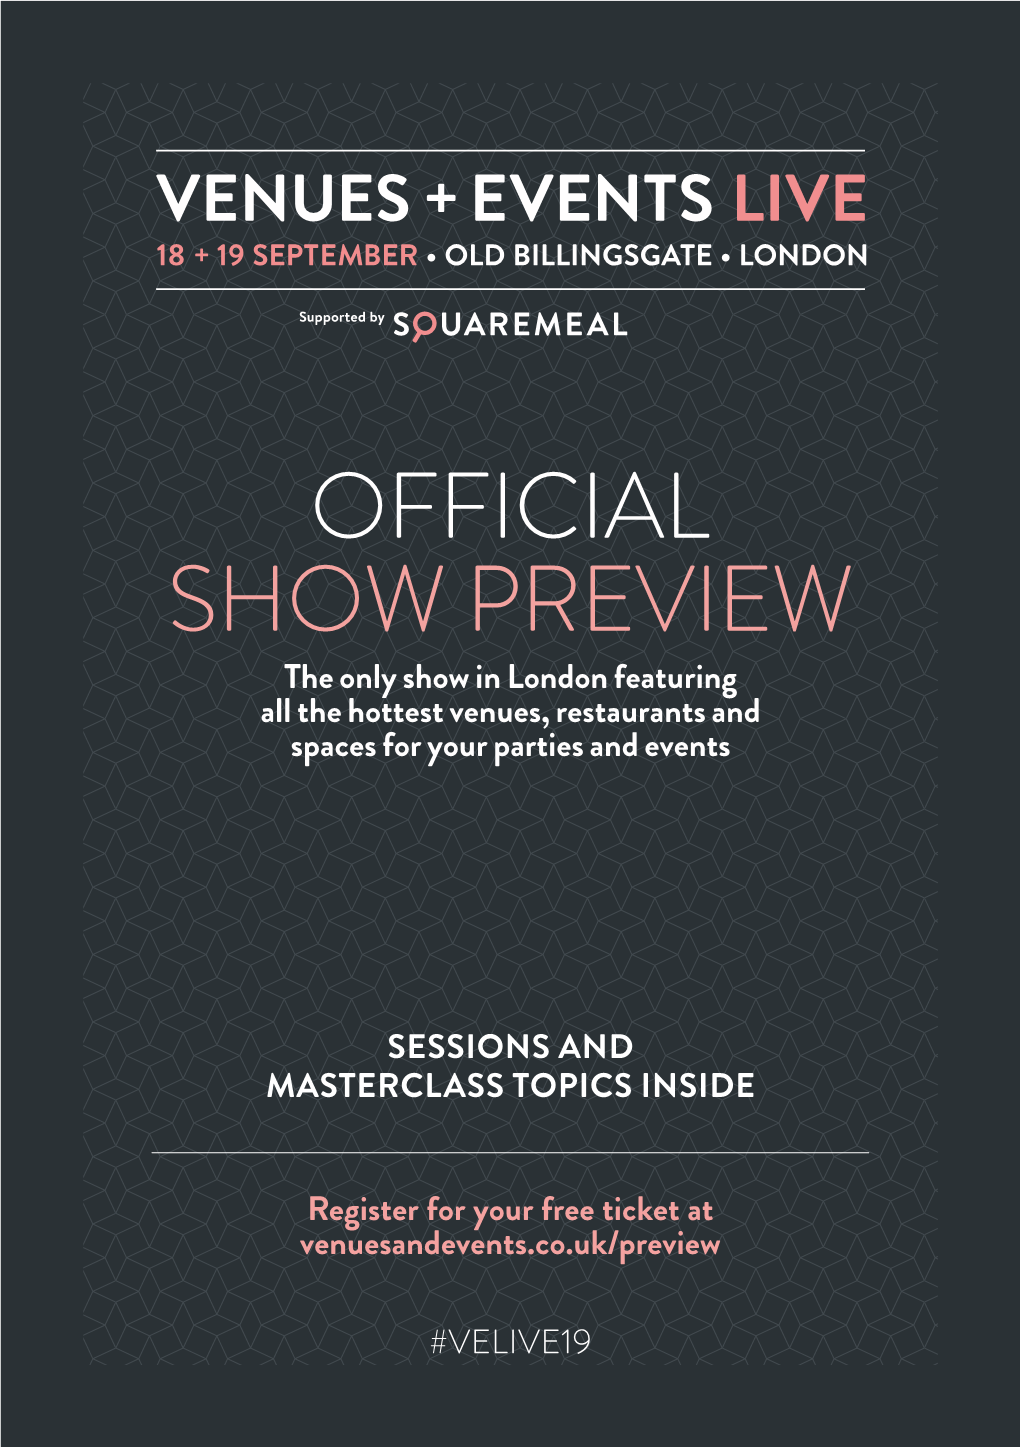 OFFICIAL SHOW PREVIEW the Only Show in London Featuring All the Hottest Venues, Restaurants and Spaces for Your Parties and Events